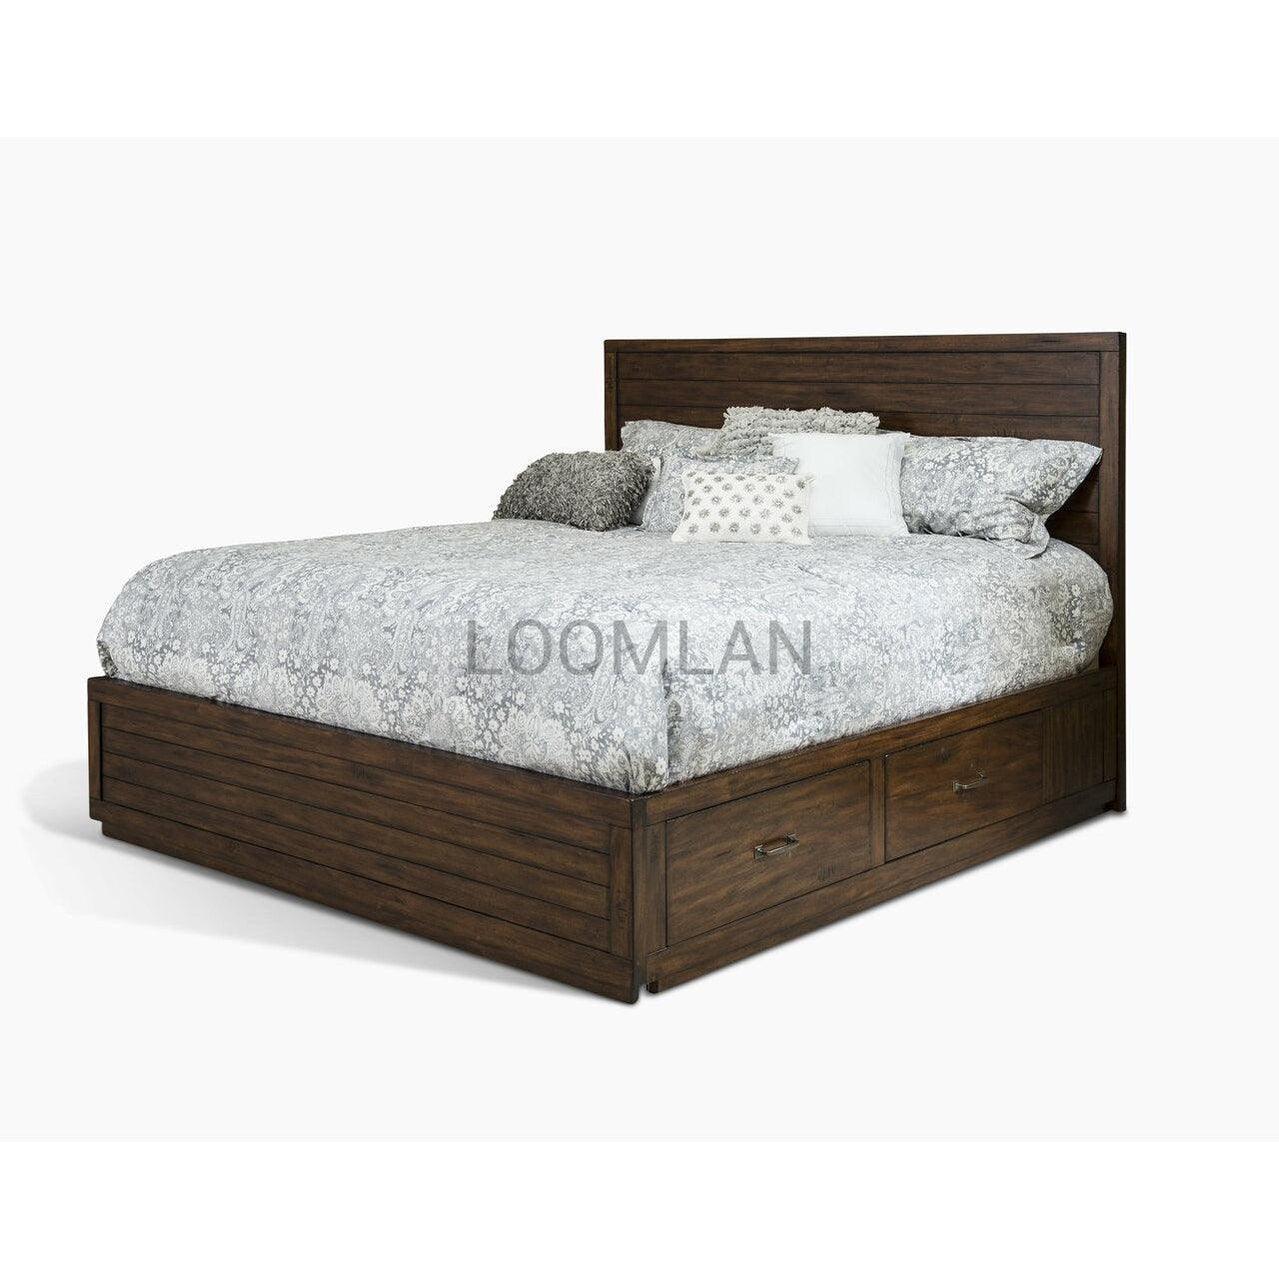 Wood Platform California King Size Bed Frame With Drawers Beds Sideboards and Things By Sunny D